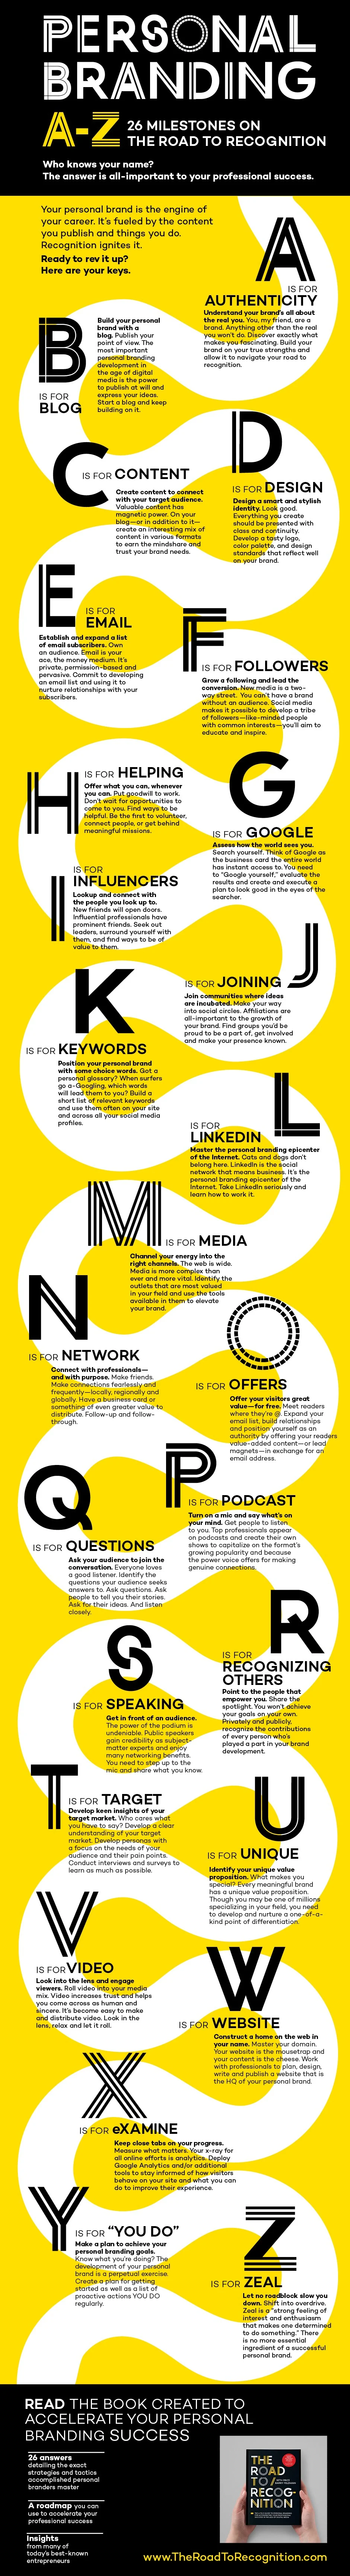 Personal Branding A to Z - #infographic